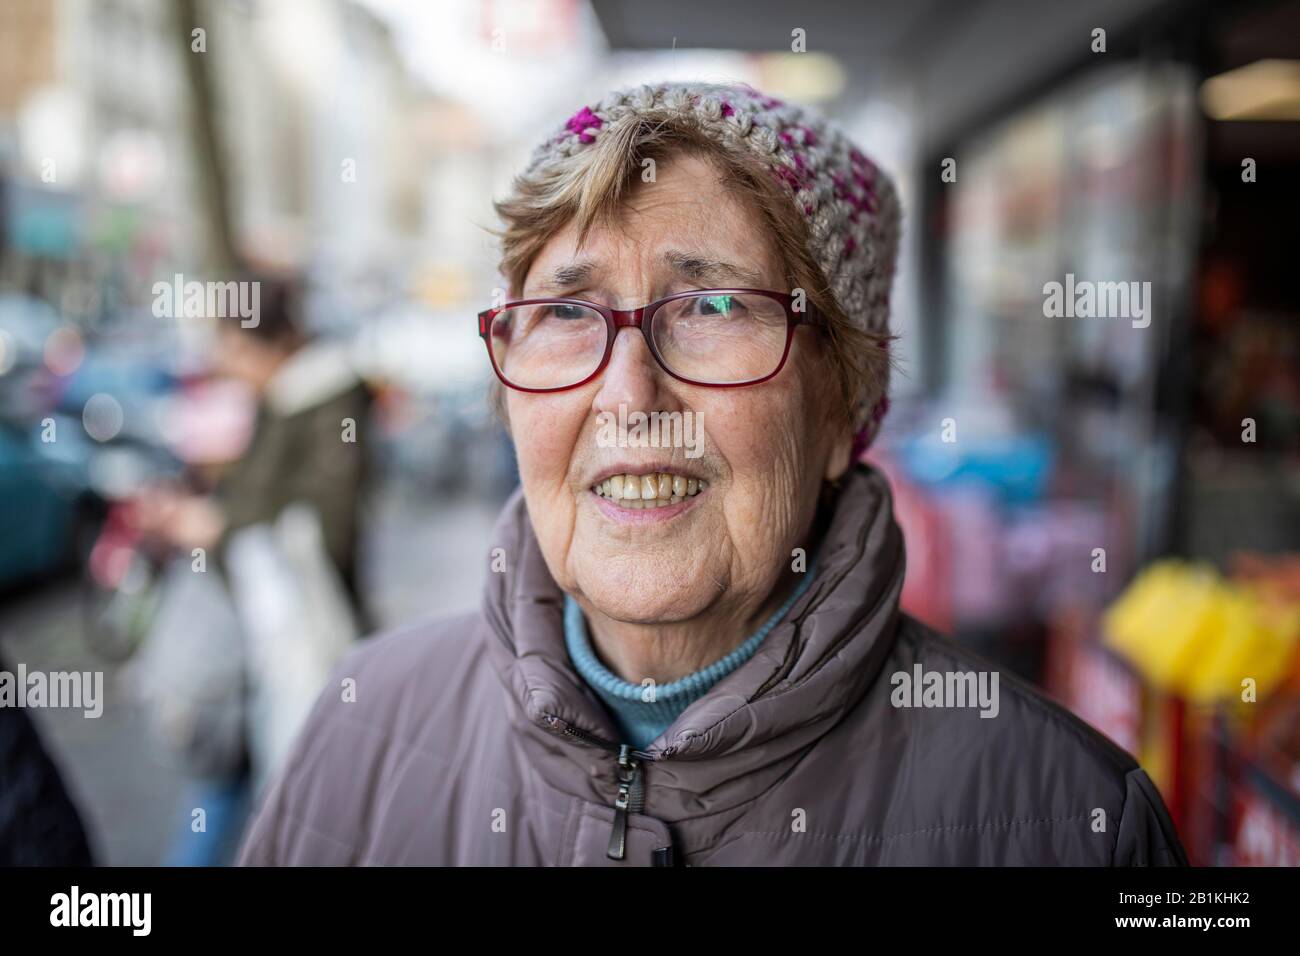 Senior citizen with glasses and cap, portrait in the city, Cologne, North Rhine-Westphalia, Germany Stock Photo